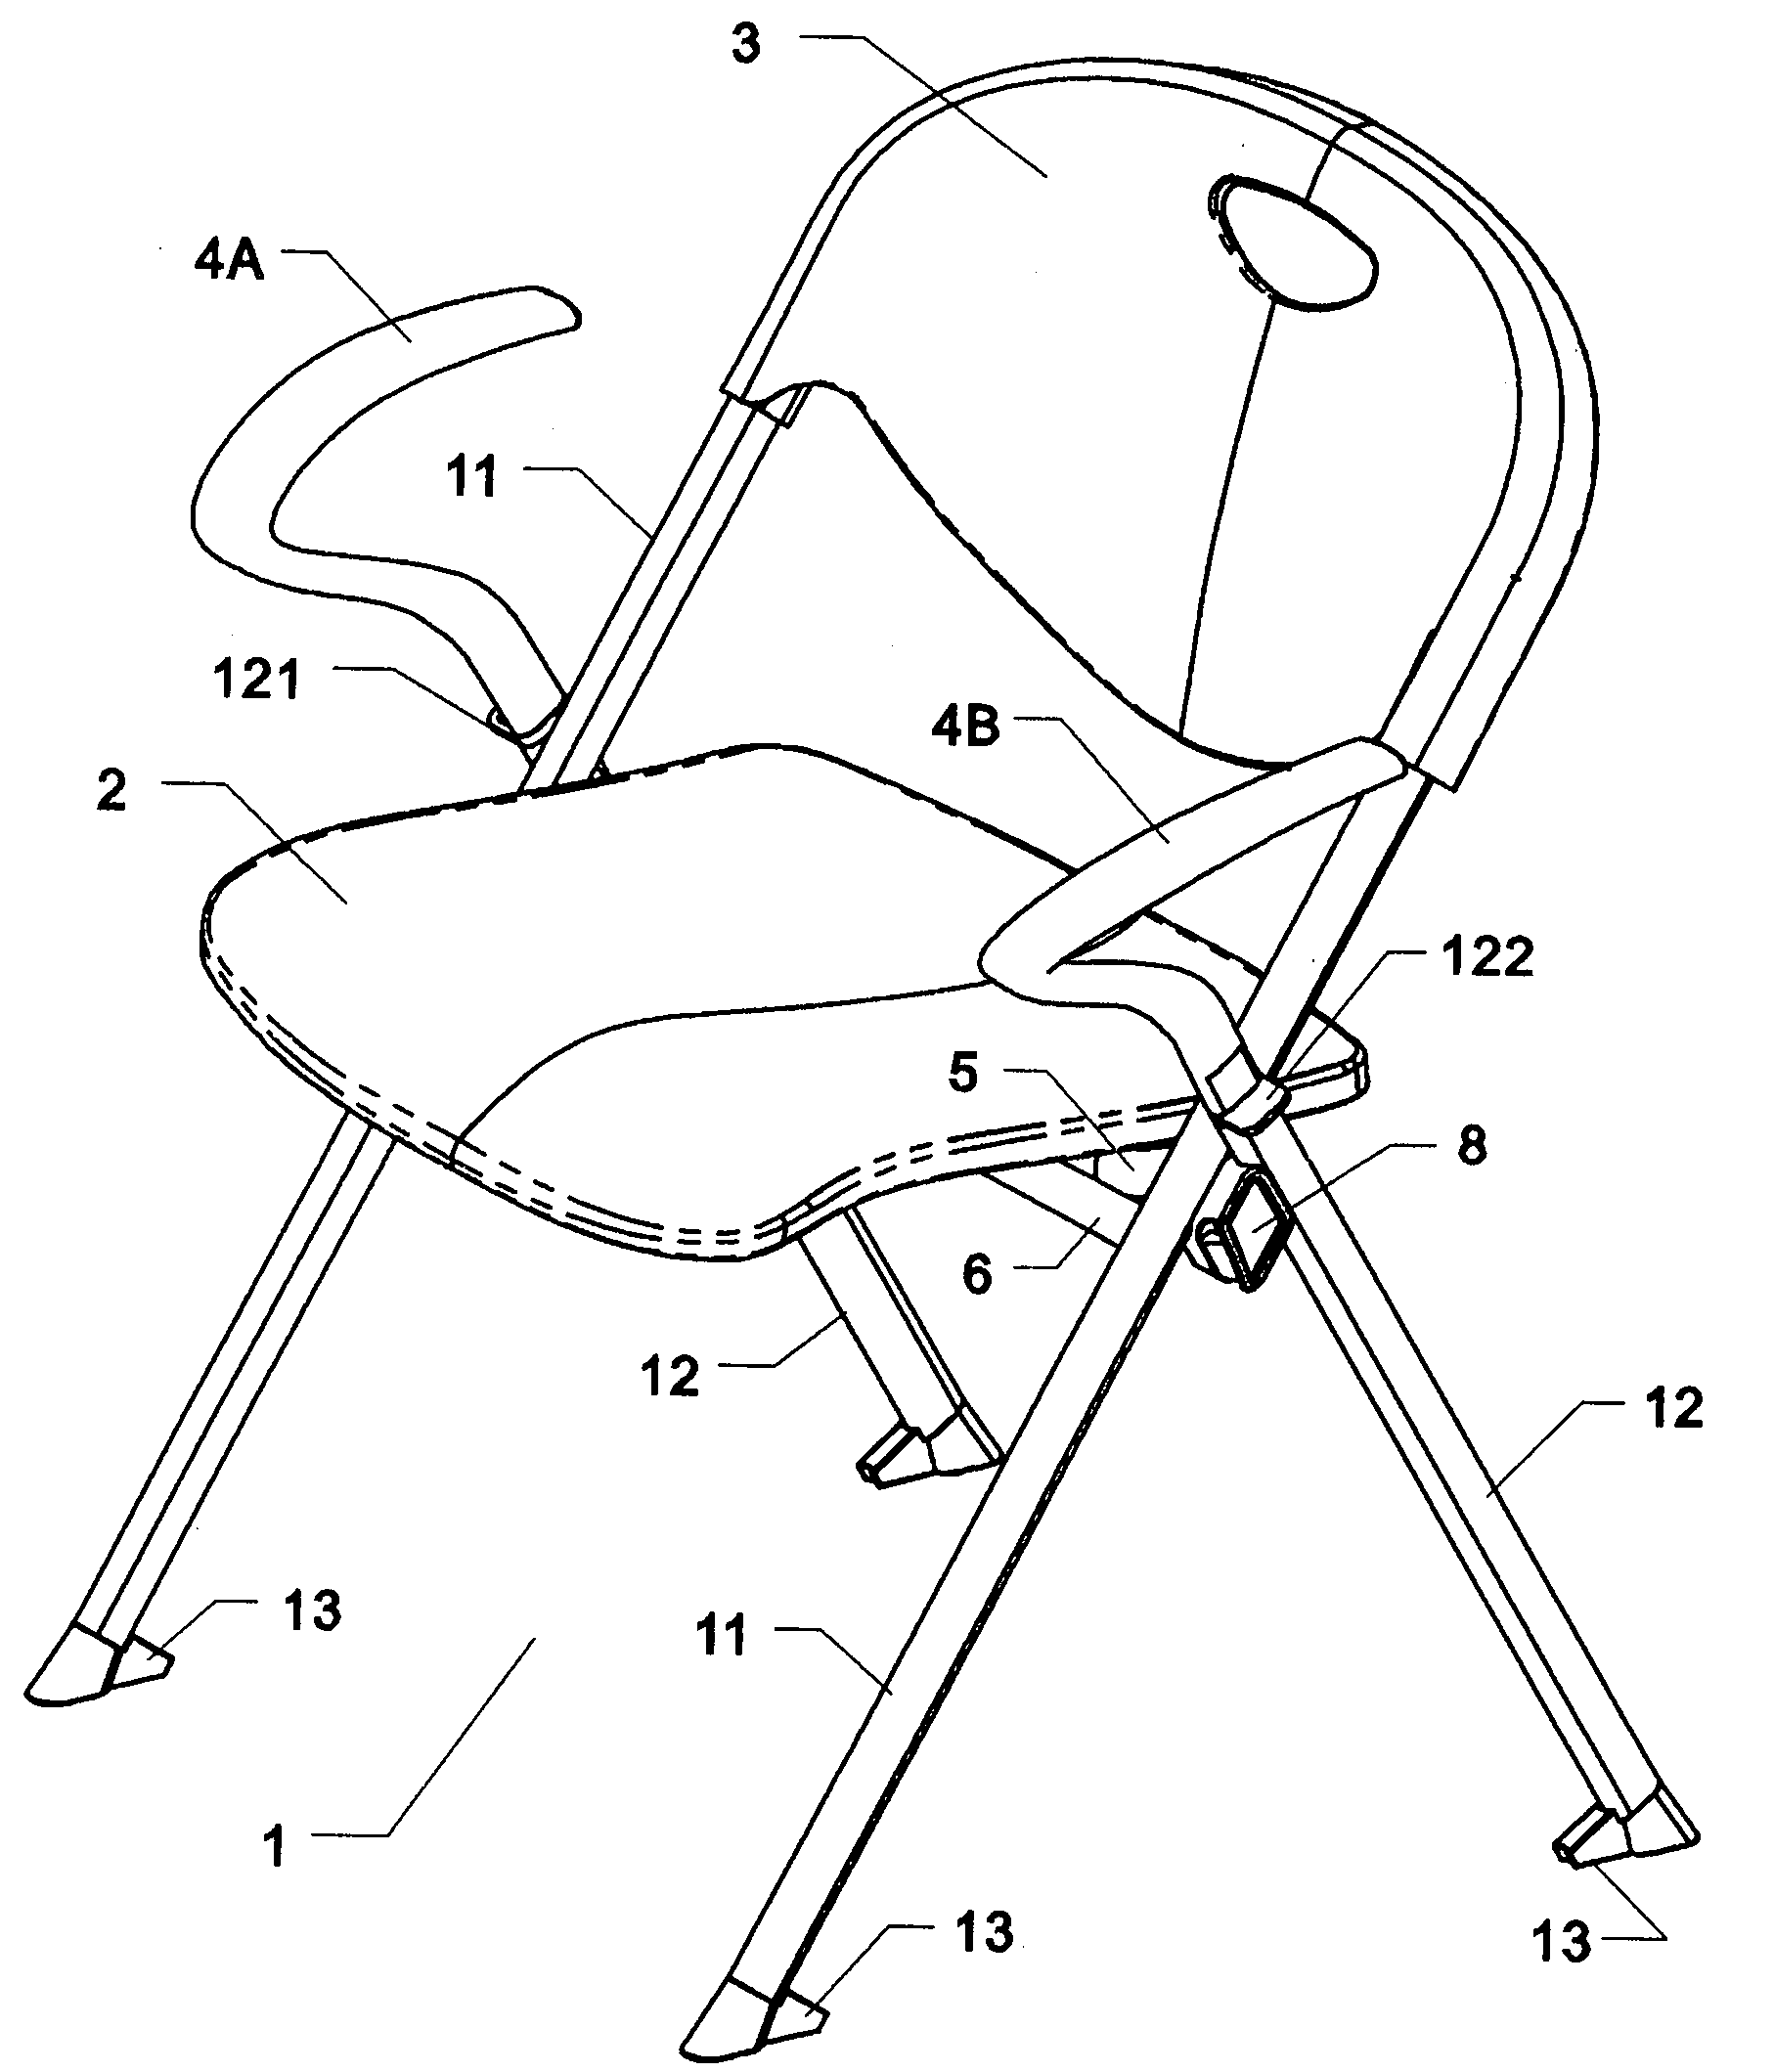 Structure of chair capable of being stacked vertically and horizontally